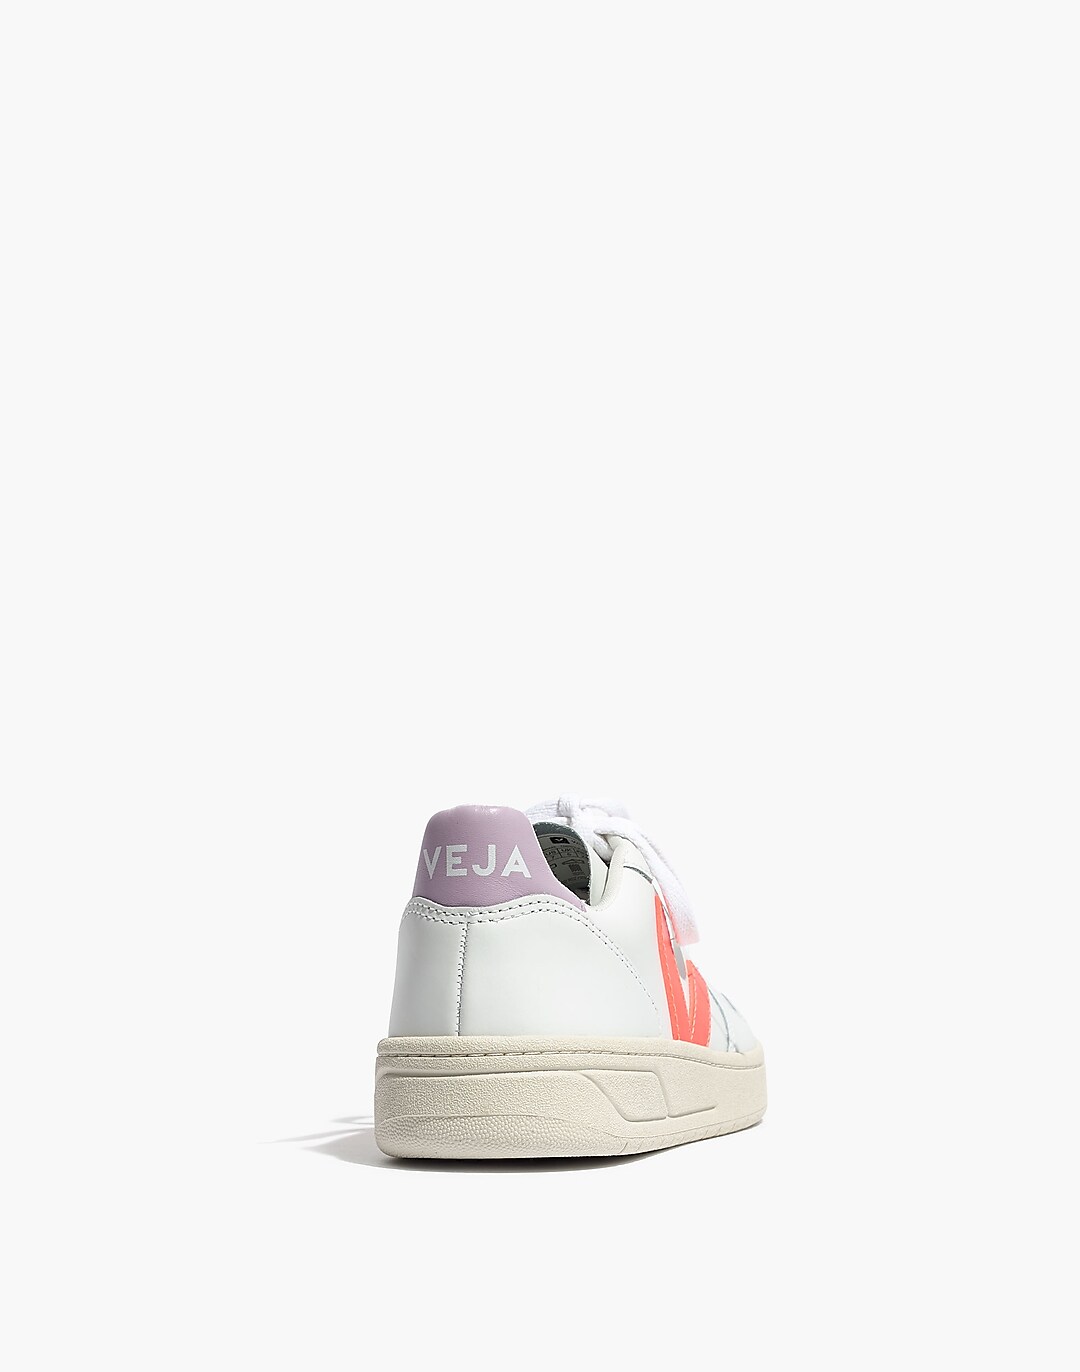 achterlijk persoon Schurend Peregrination Madewell x Veja™ V-10 Leather Sneakers in Lilac and Neon Orange